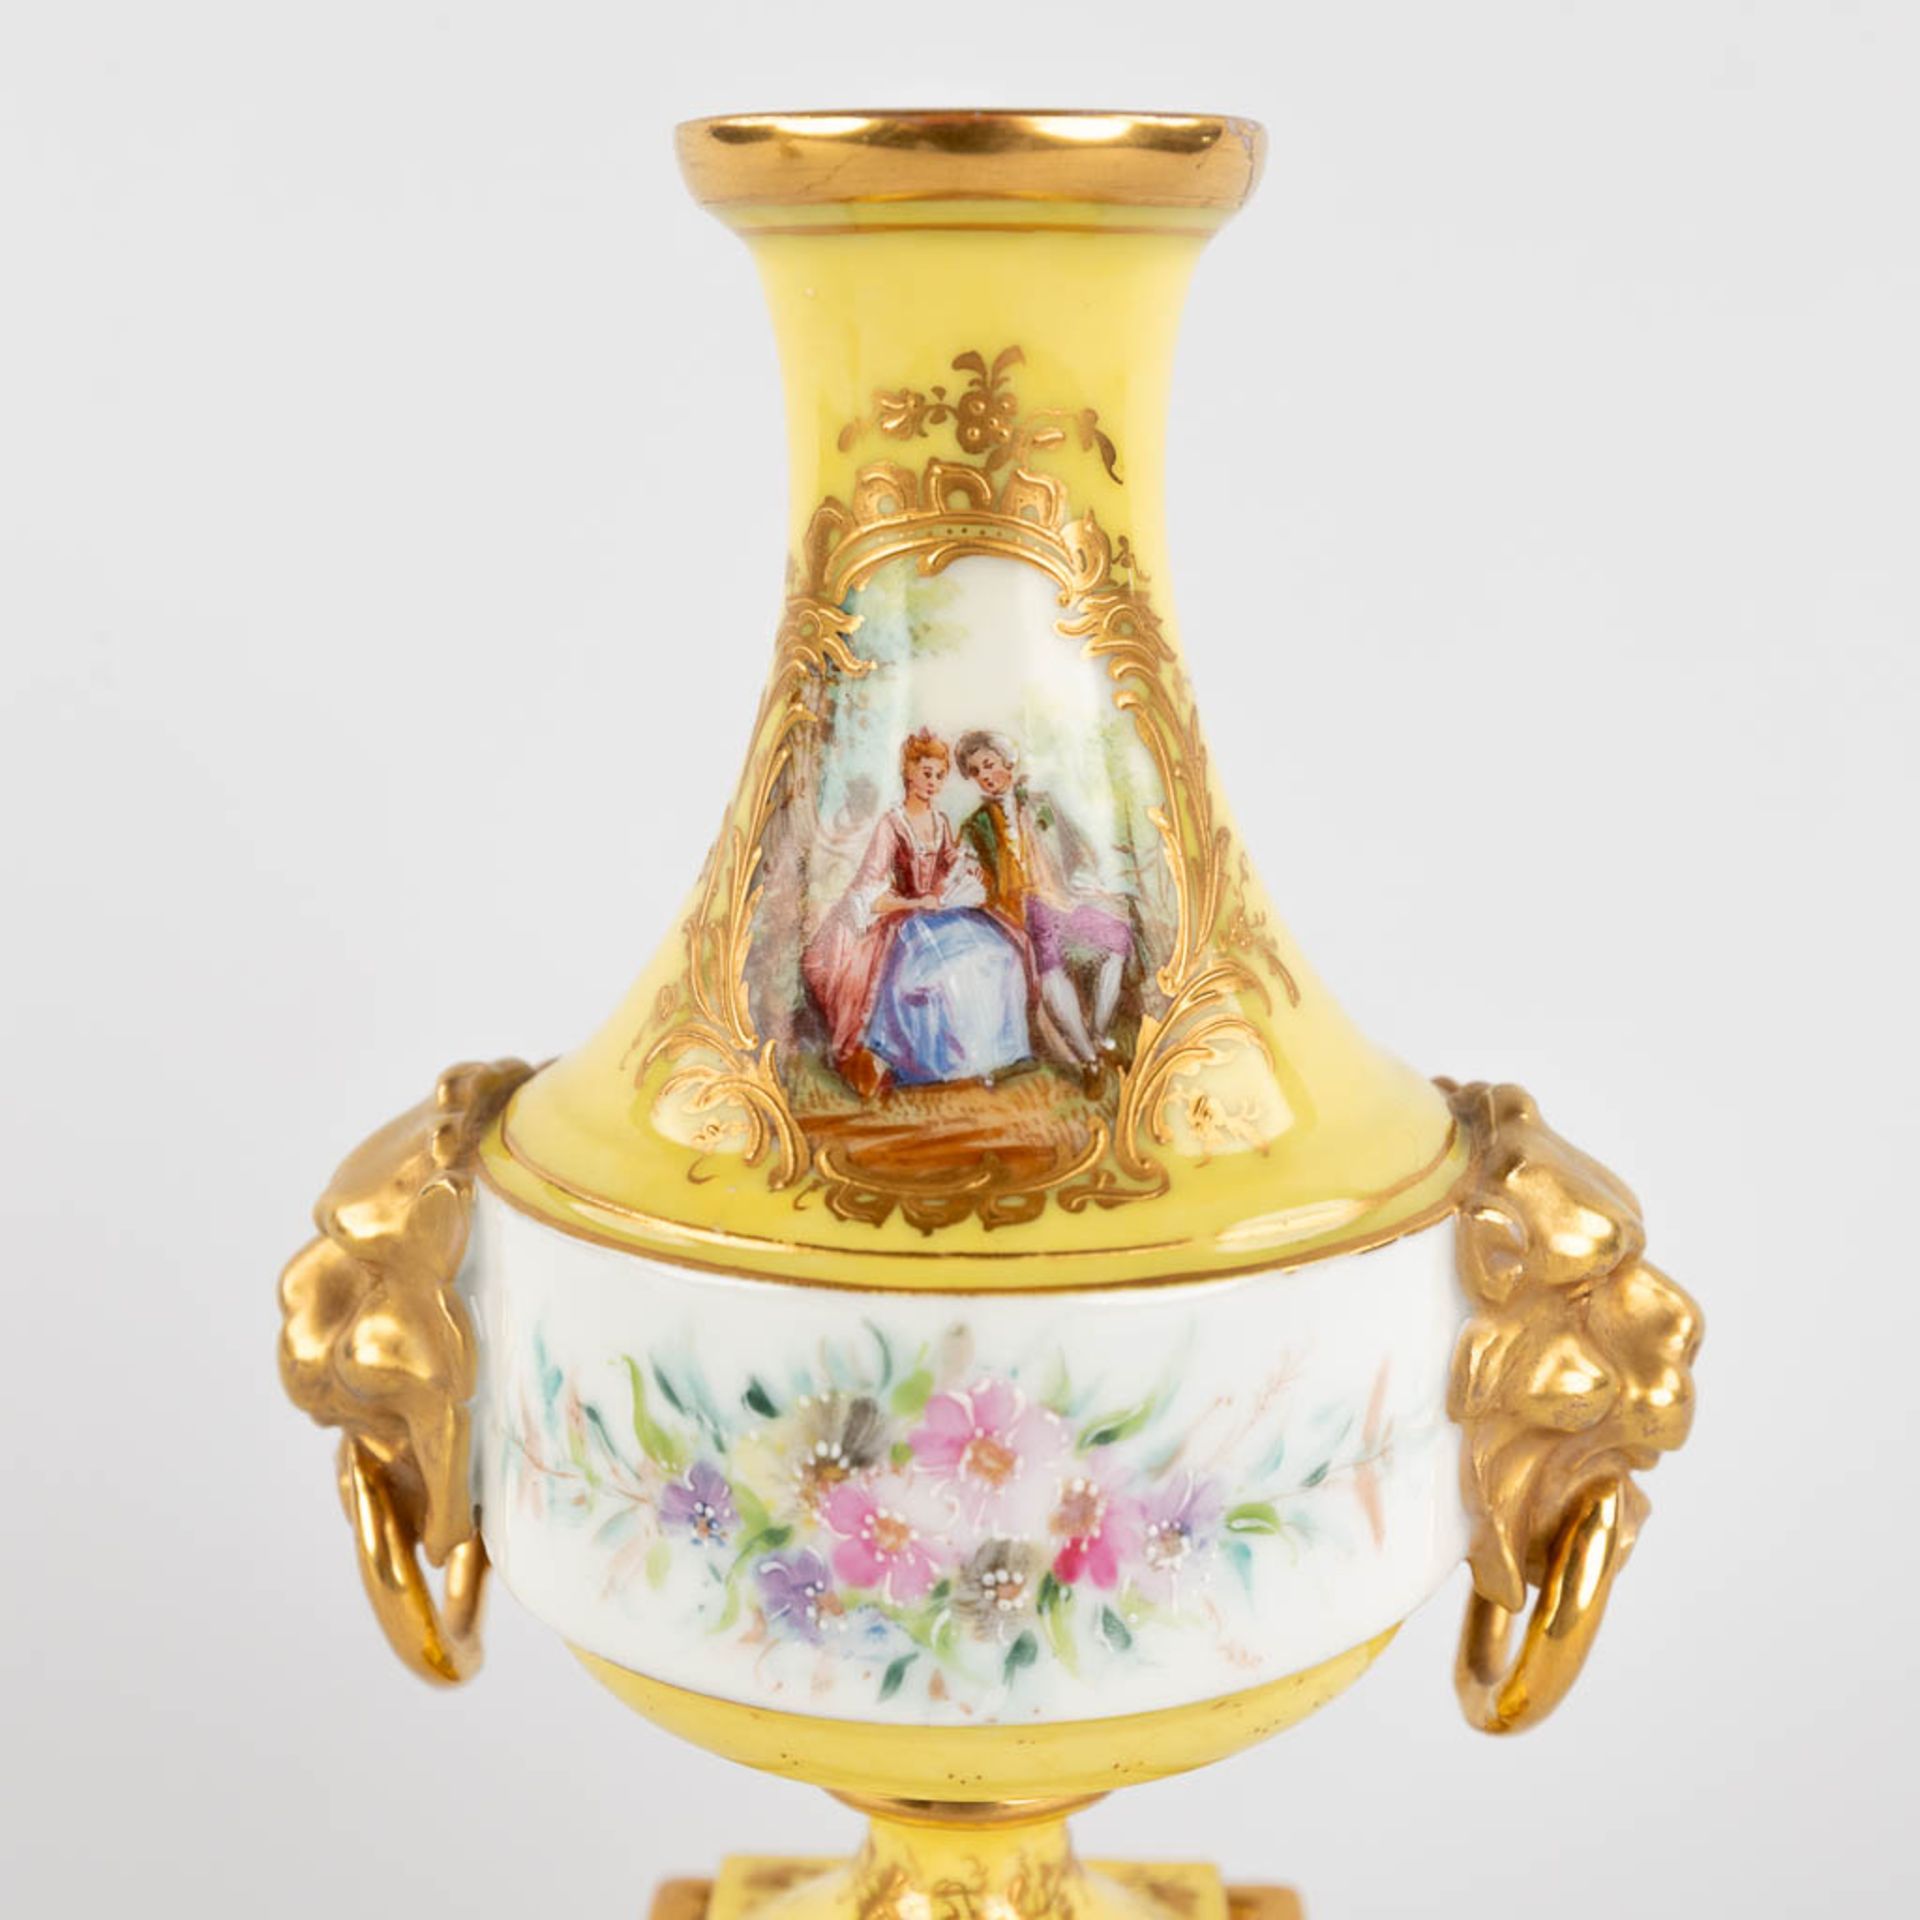 A pair of antique, hand-painted porcelain vases, yellow glaze and flower with lion's heads decor. (L - Image 14 of 16